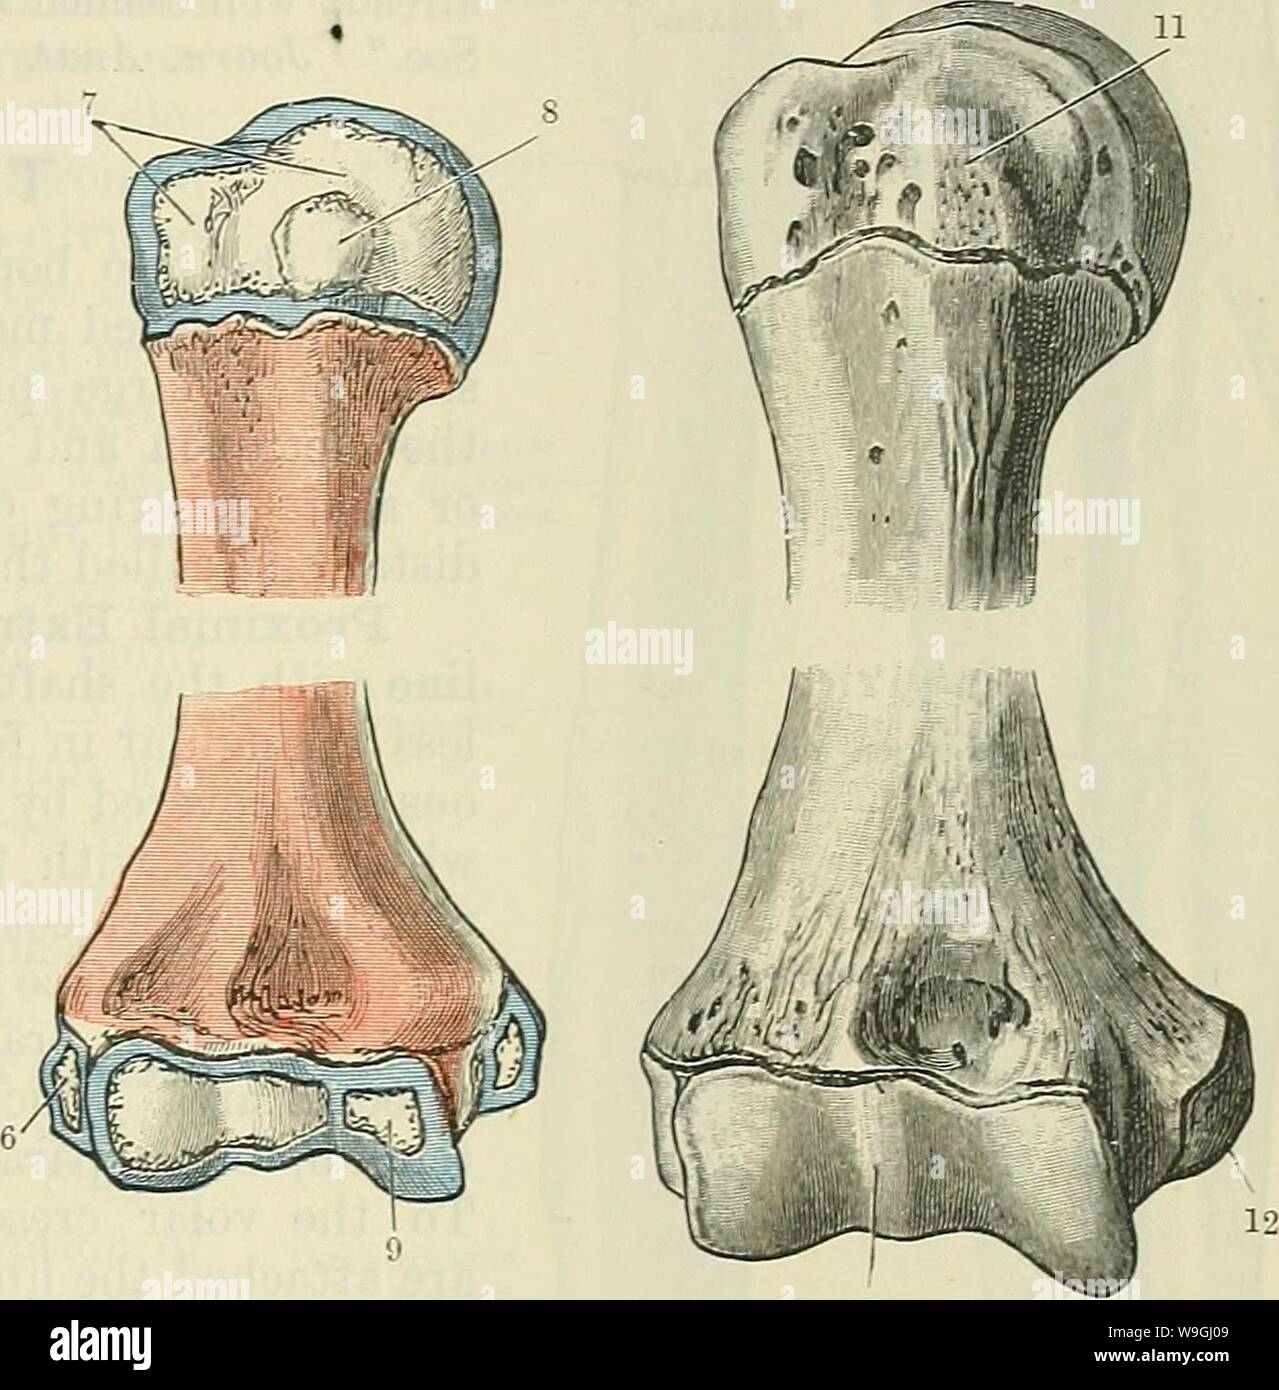 Archive image from page 242 of Cunningham's Text-book of anatomy (1914). Cunningham's Text-book of anatomy  cunninghamstextb00cunn Year: 1914 ( At birth. About 5 years. Fig. 201. About 12 years. -Ossification of the Humerus. About 16 years. 8. Centre for smaller tubercle fuses with other.' centres about 7 years. 9. Appears about 11 or 12 years. 10. Inferior epiphysis fuses with shaft about 16 to 17 years. 11. Superior epiphysis fuses with shaft about 25 years. 12. Fuses with shaft about 17 to 18 years. 1. Appears early in 2nd month fcetal life. 2. For larger tubercle, appears 2 to 3 years. 3. Stock Photo